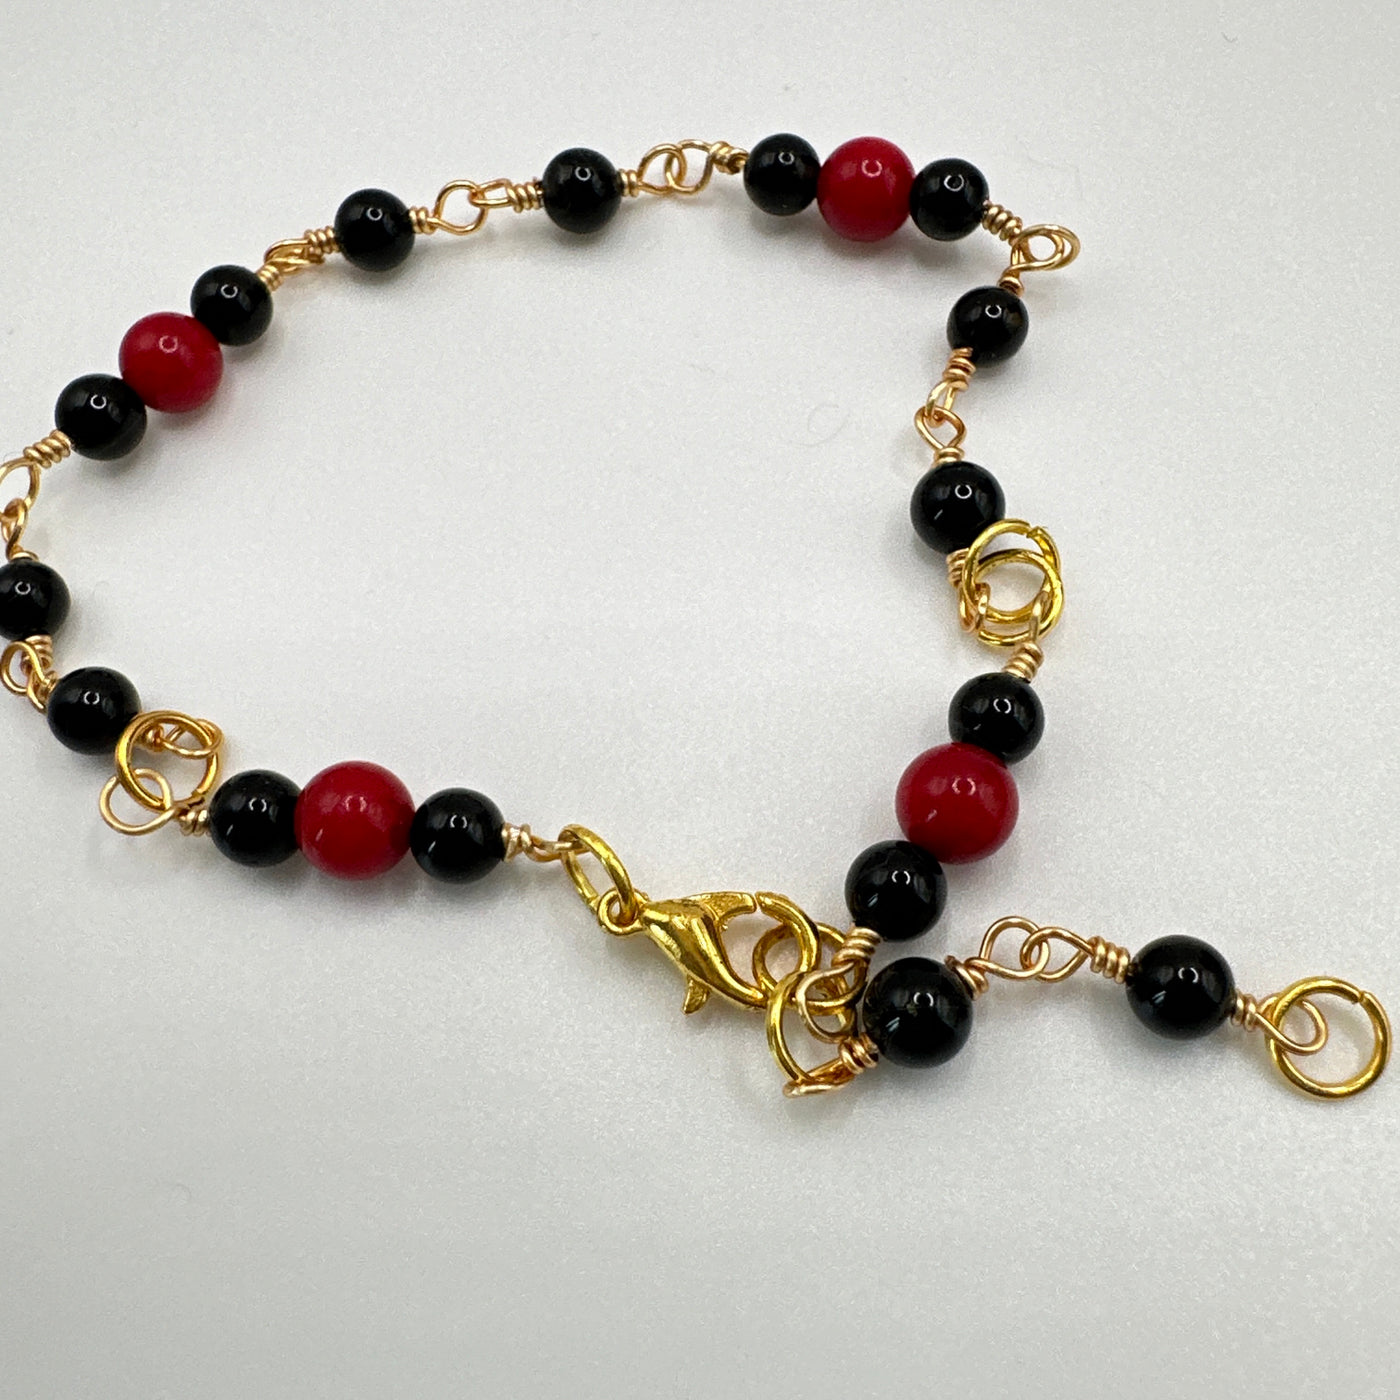 Bracelet in brass and onyx with red corals